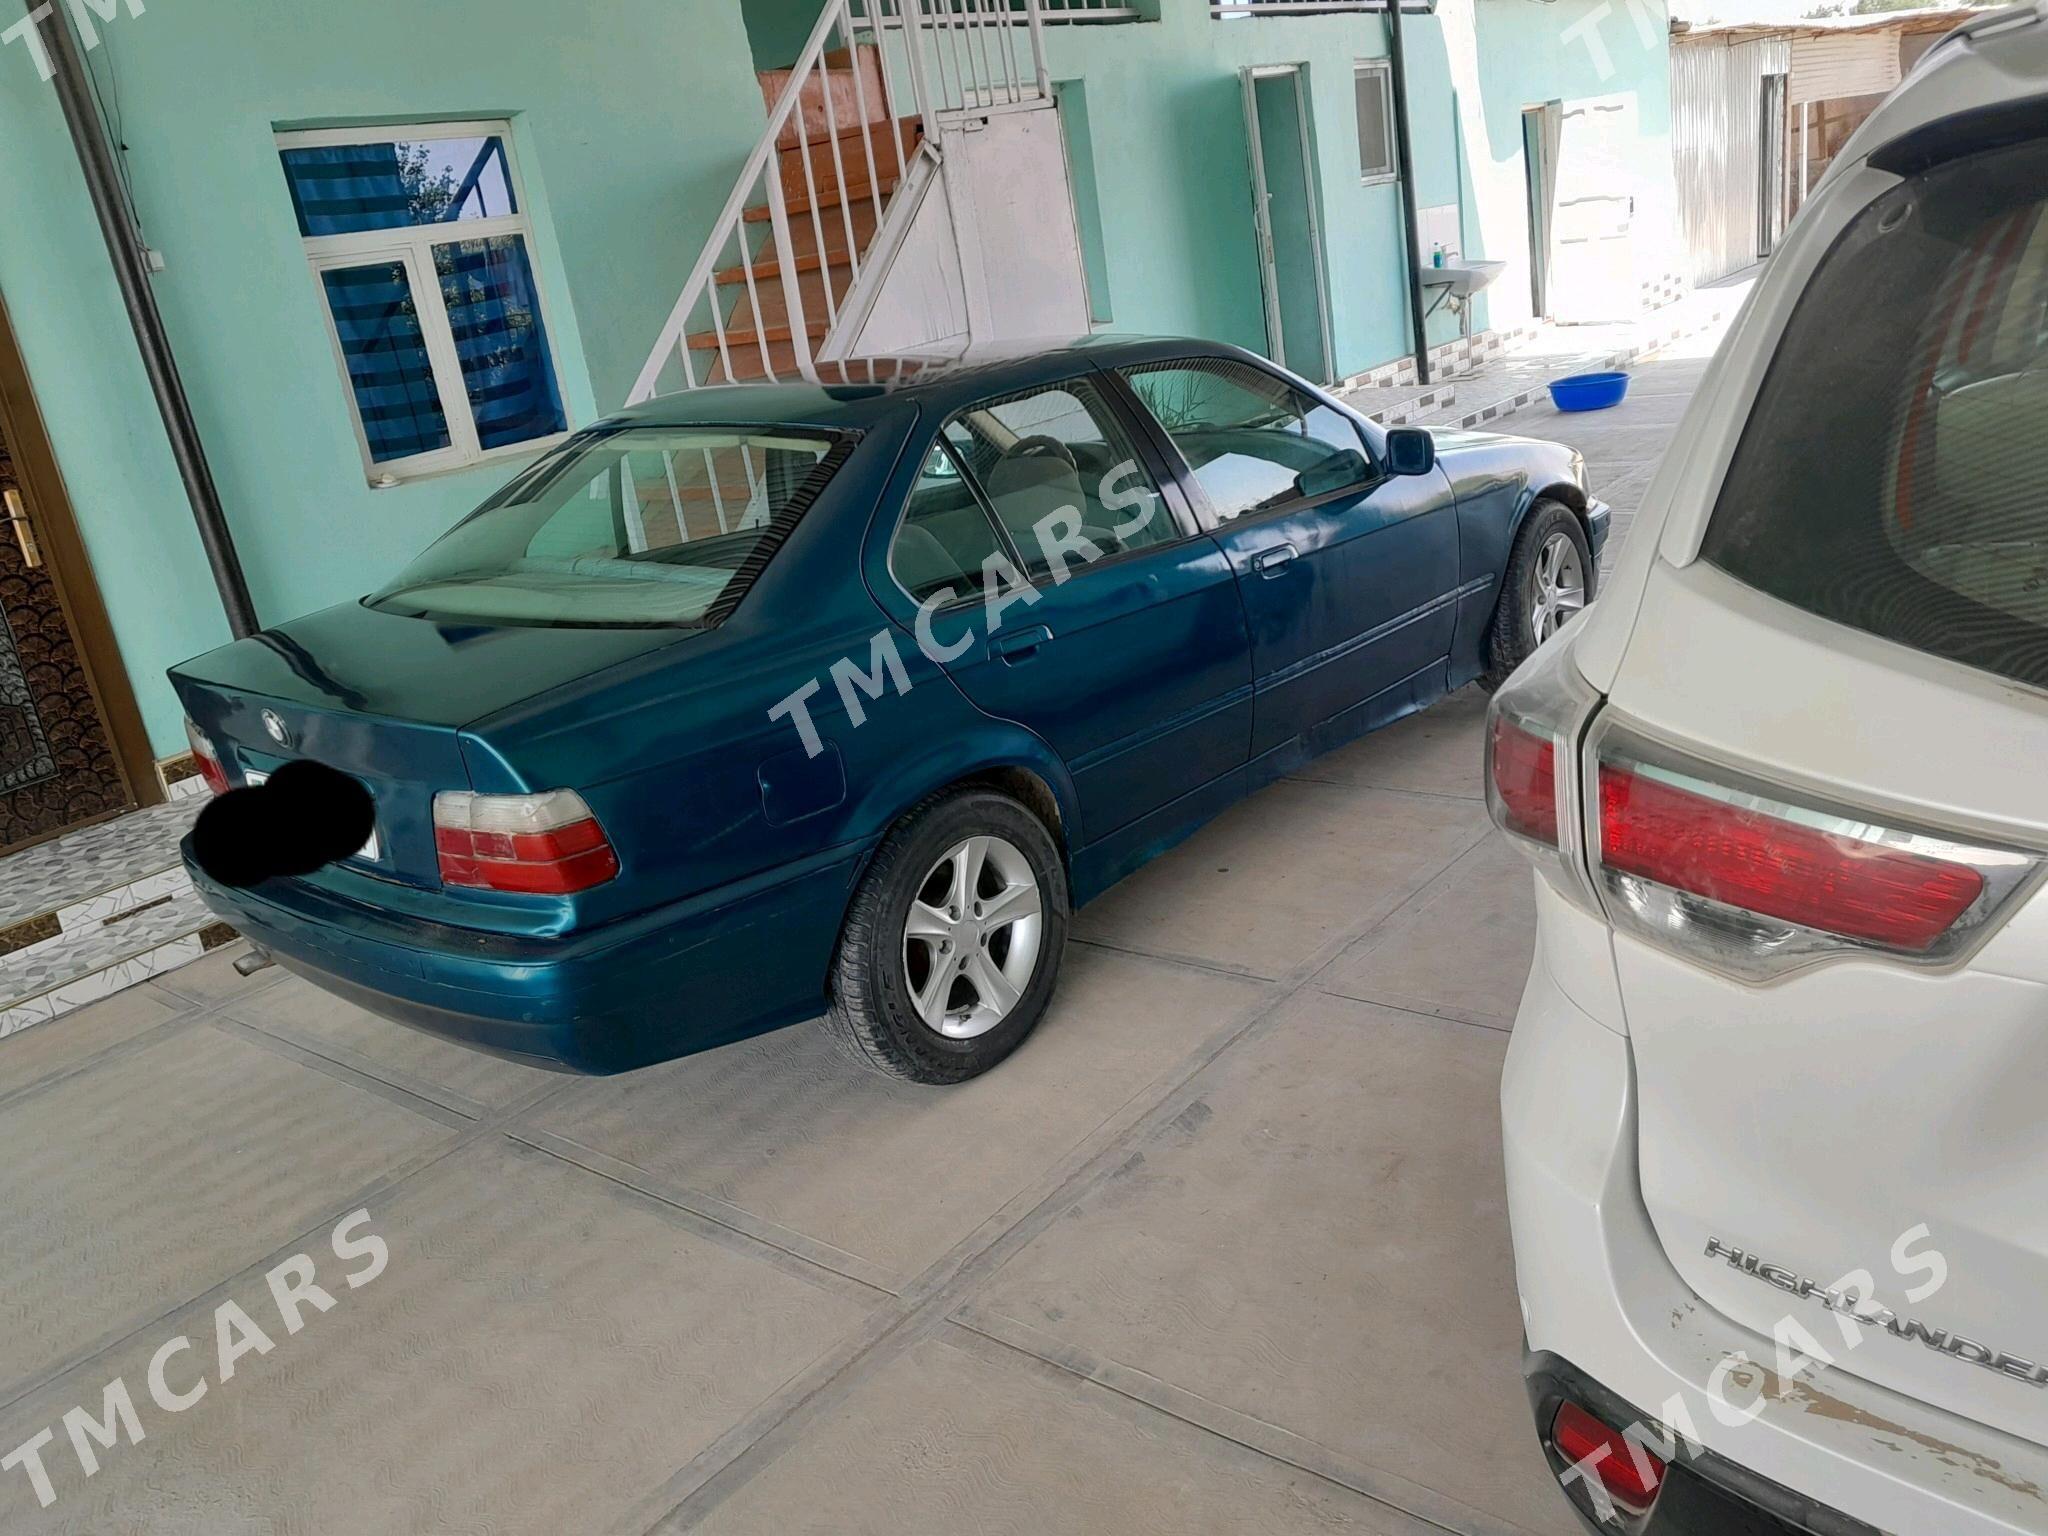 Toyota Camry 1992 - 24 000 TMT - Ёлётен - img 3